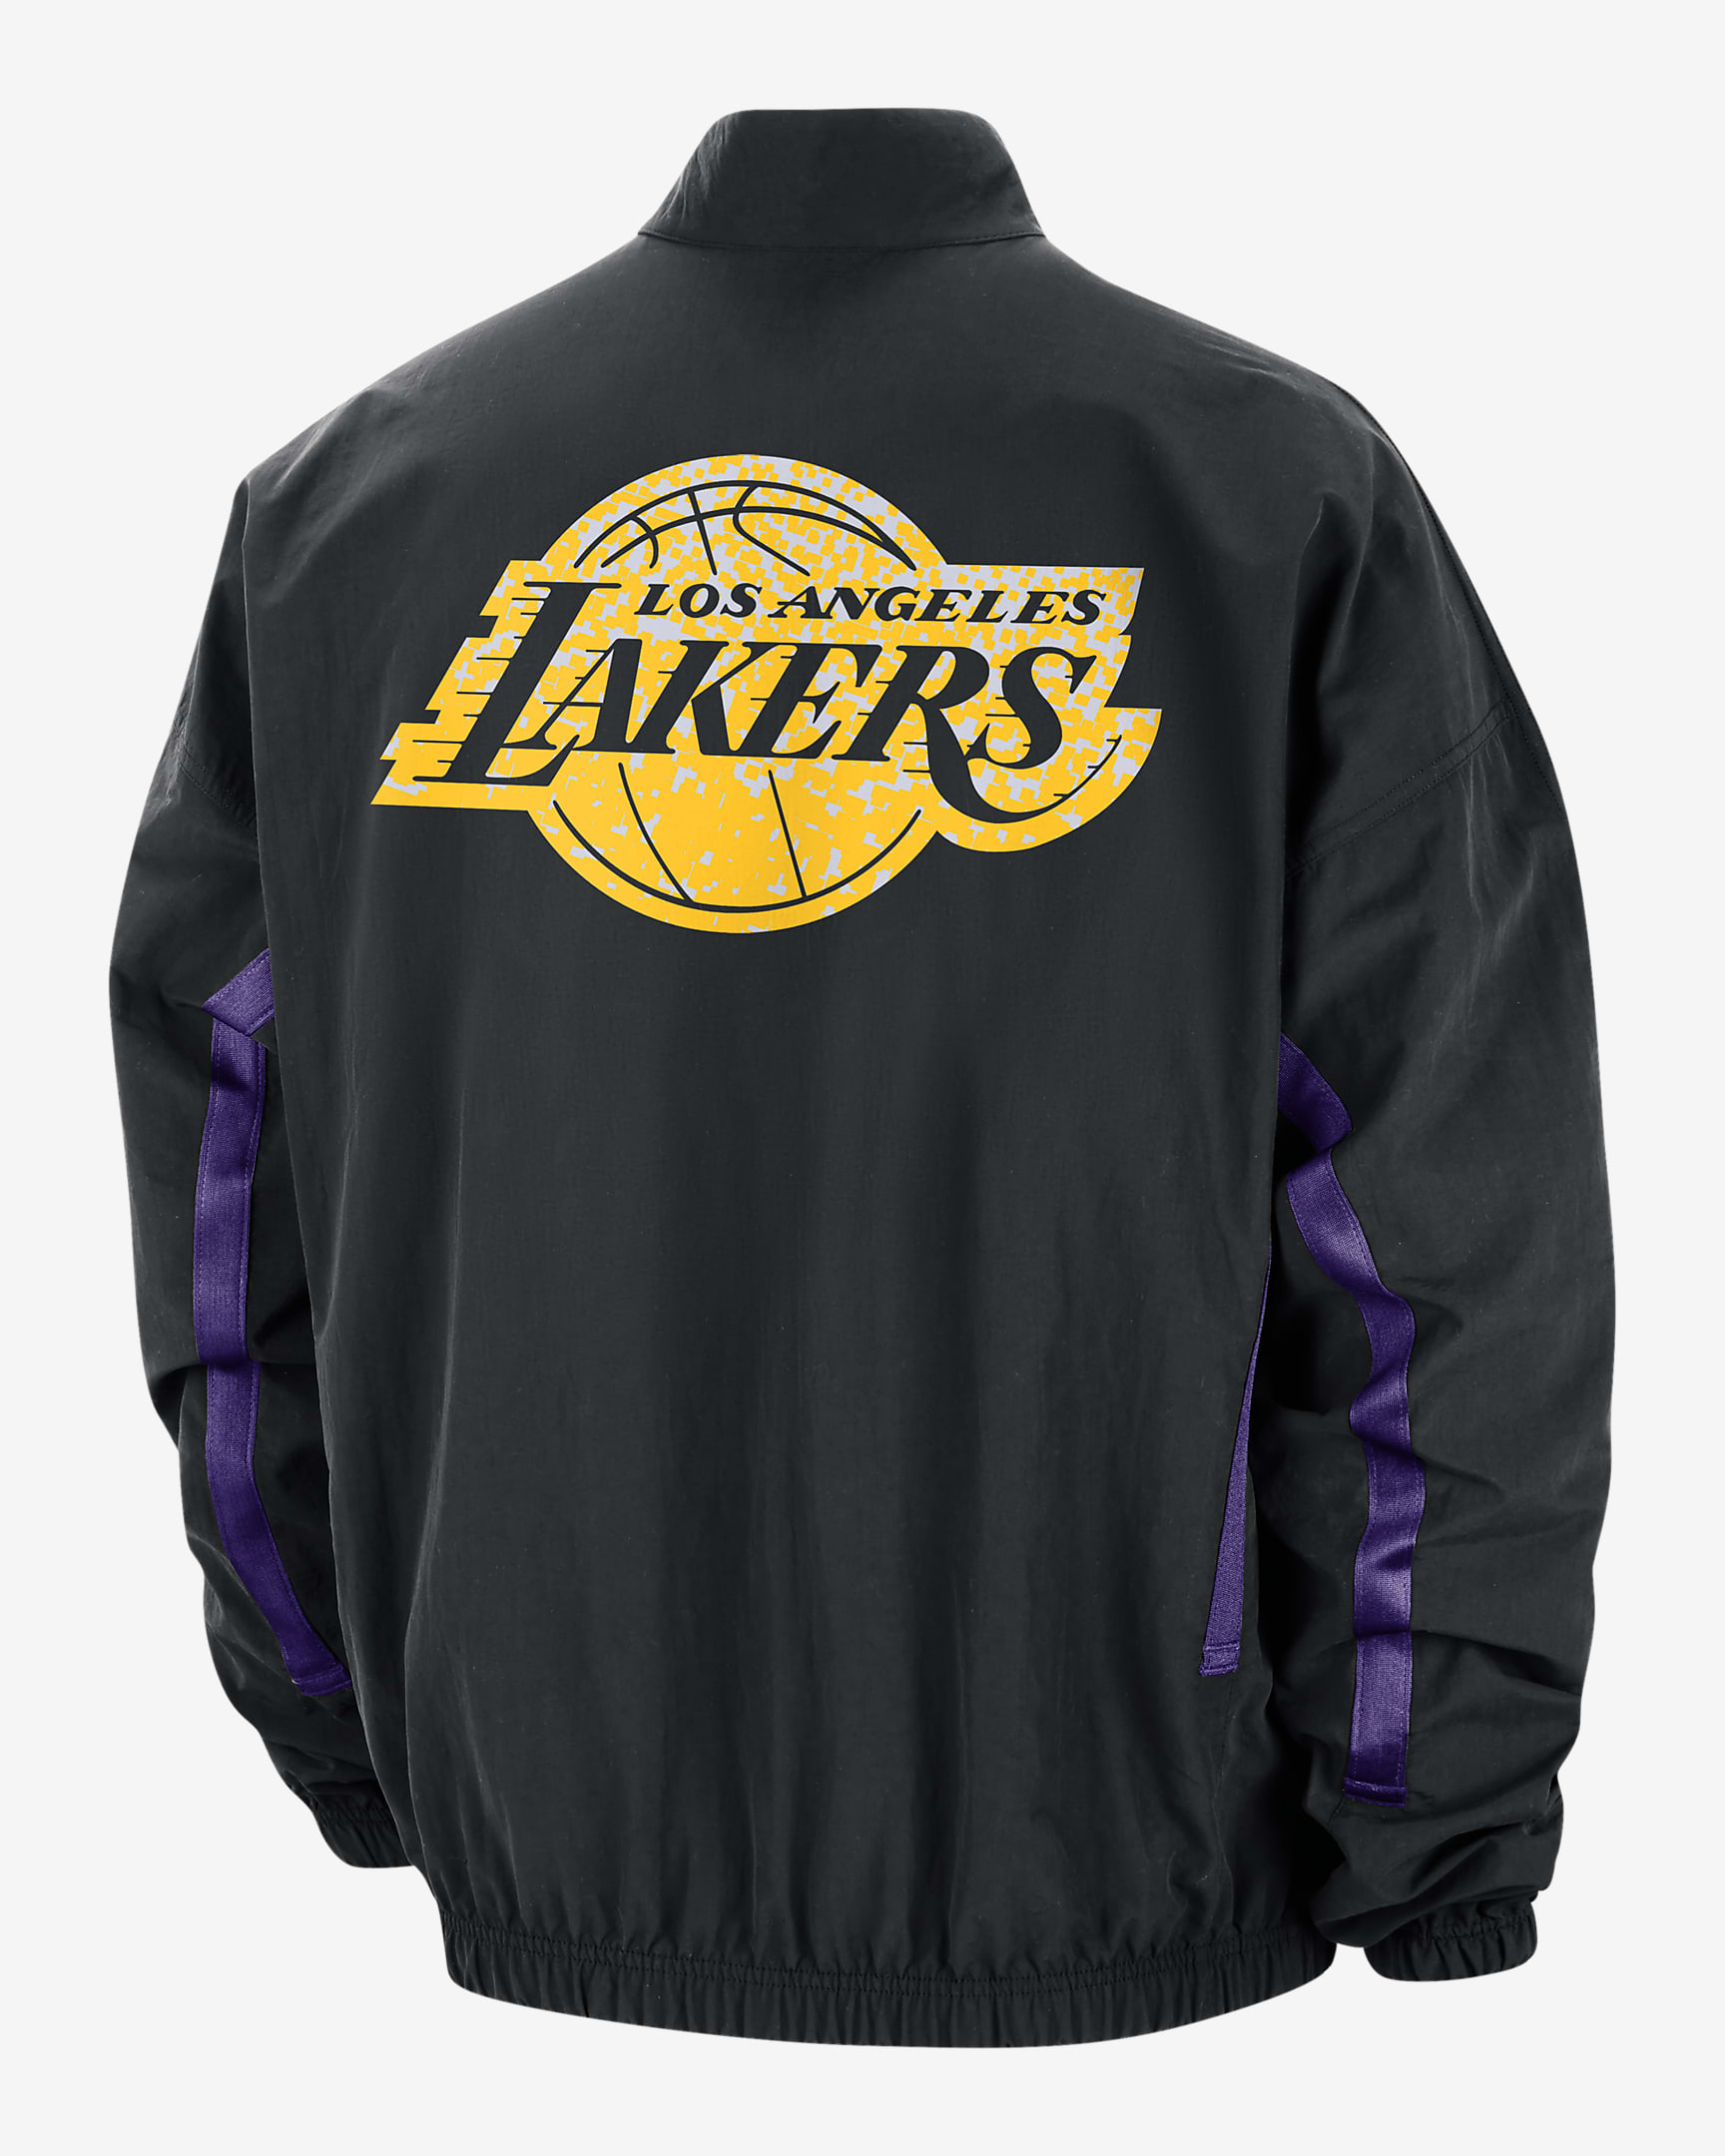 Los Angeles Lakers DNA Courtside Men's Nike NBA Woven Graphic Jacket ...